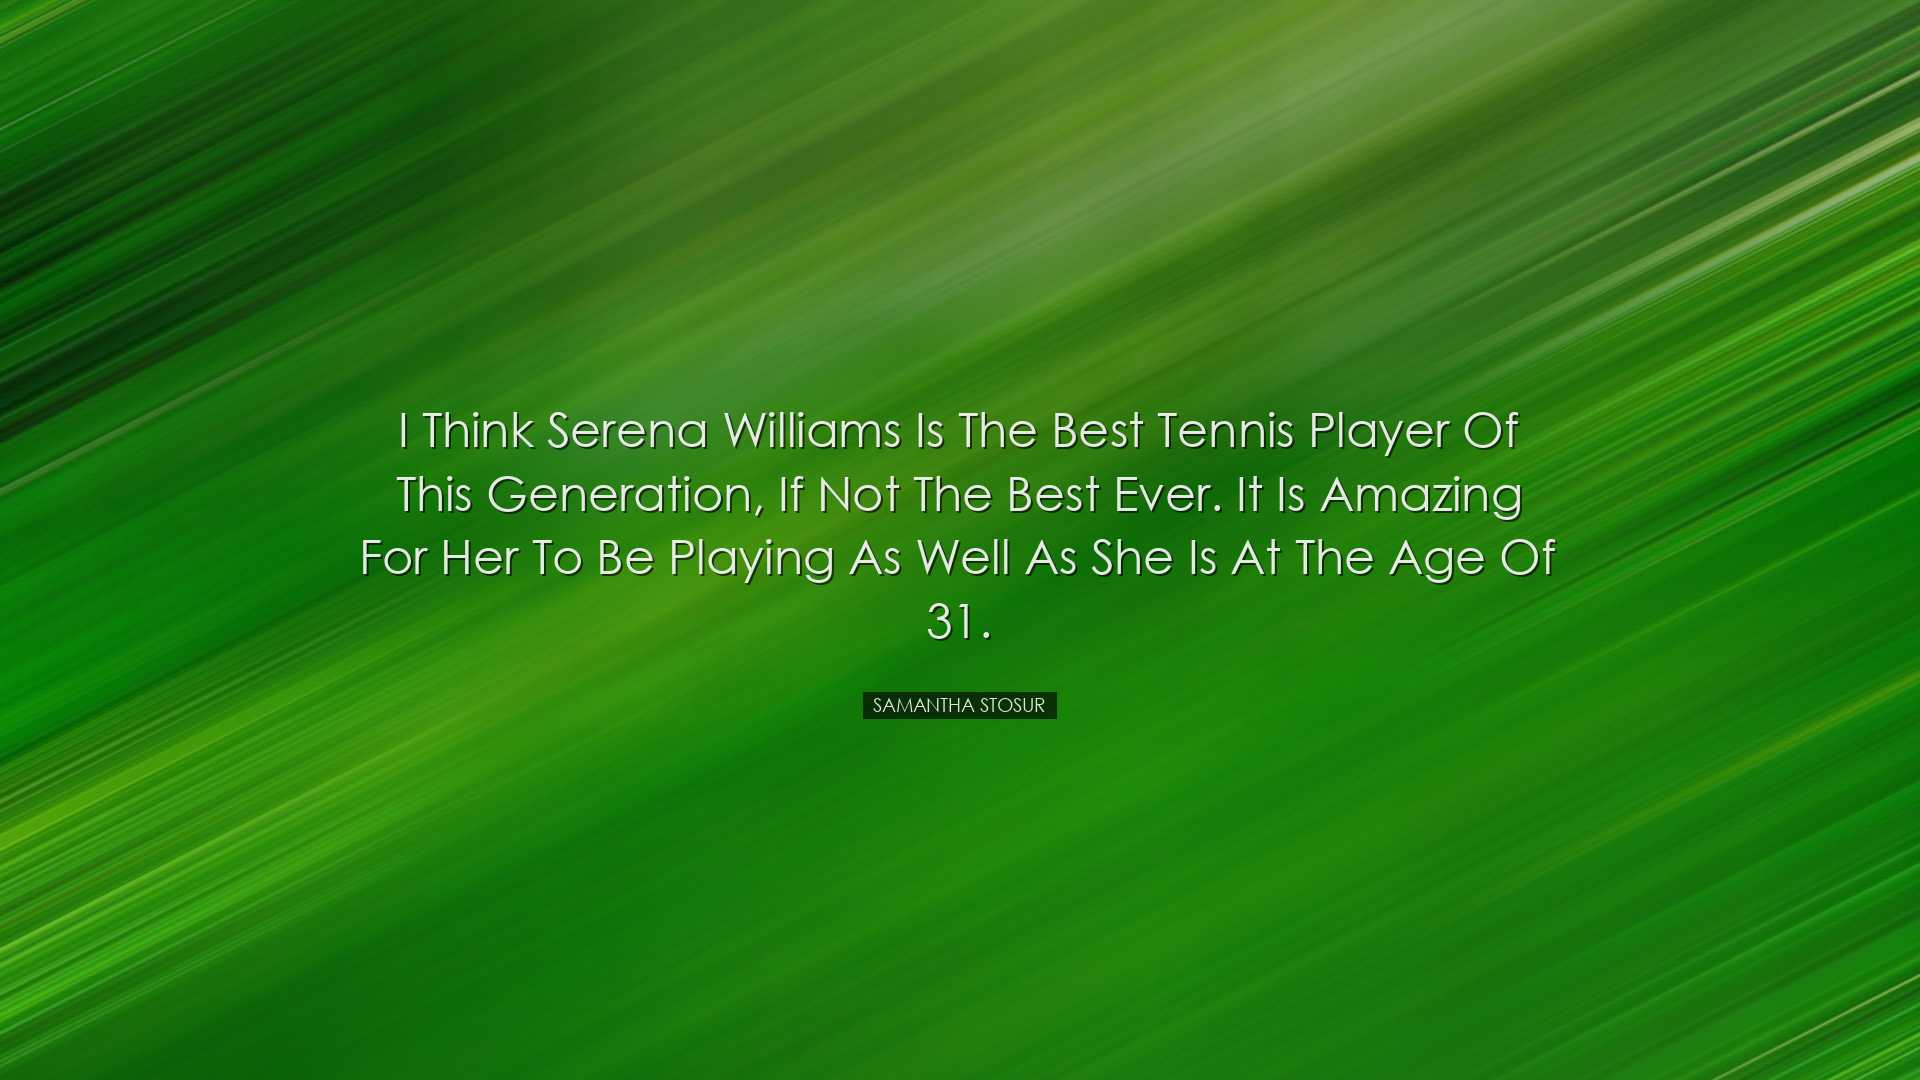 I think Serena Williams is the best tennis player of this generati